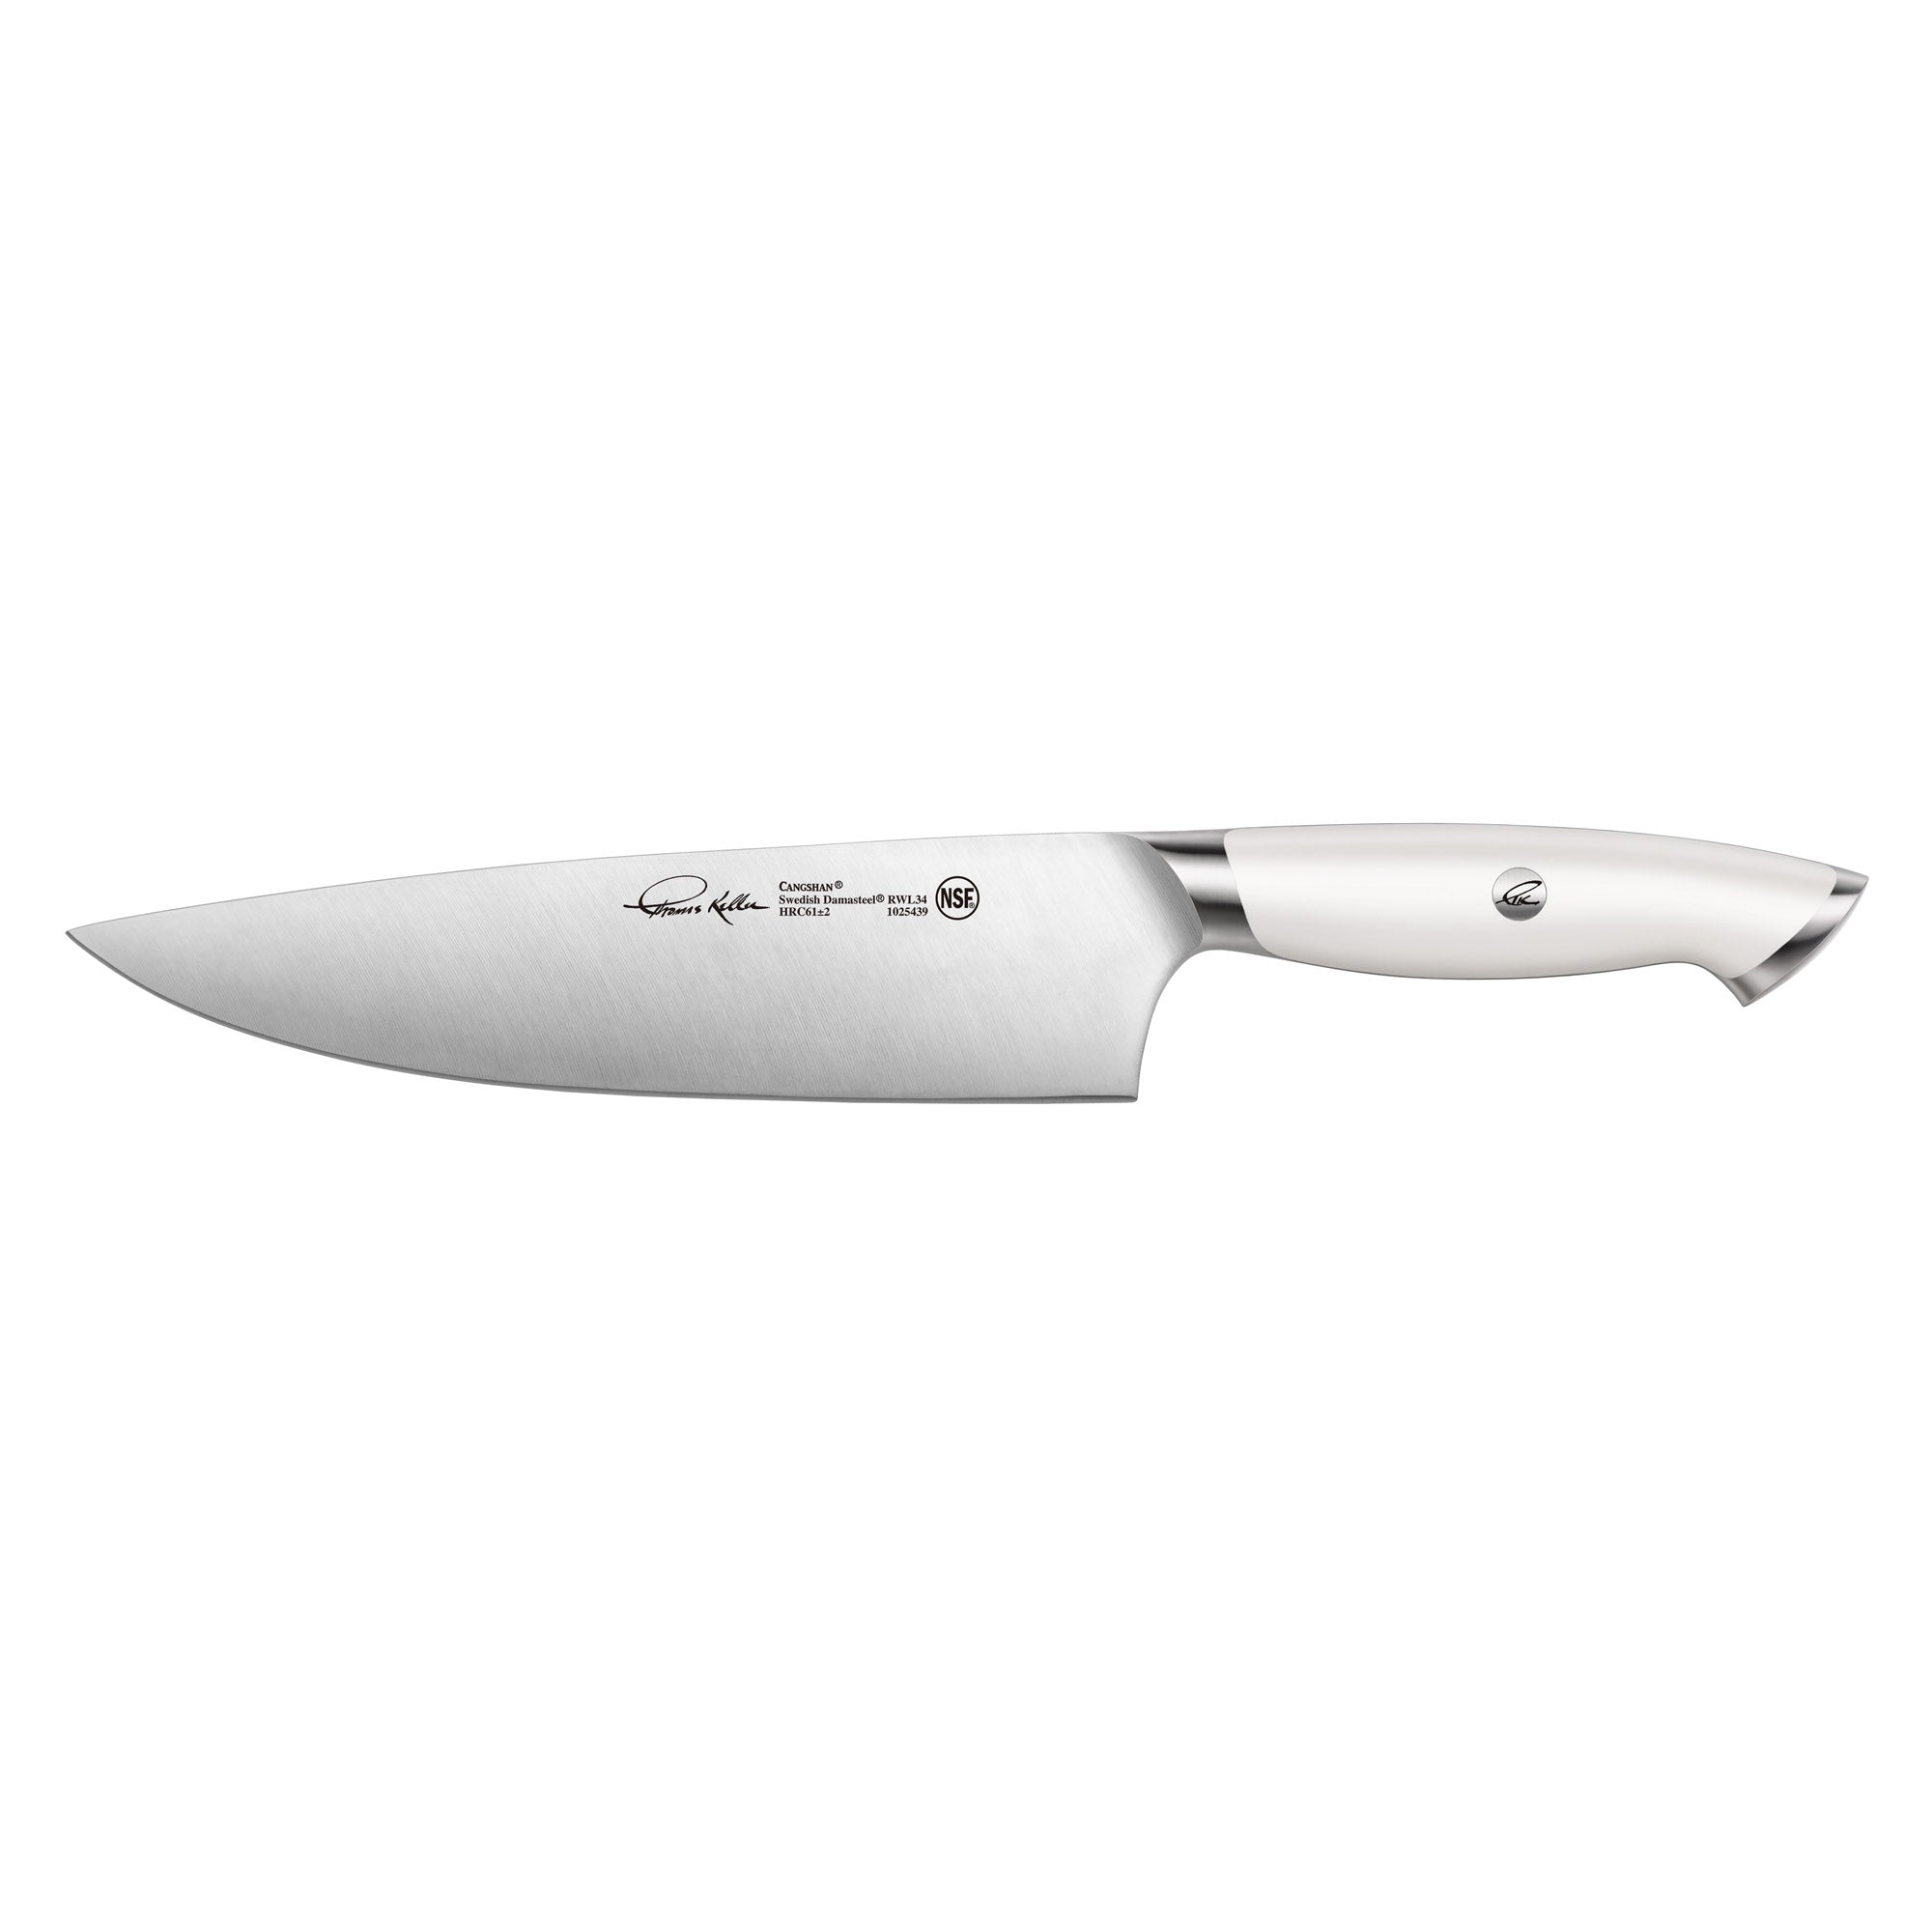 Thomas Keller Signature Collection 8" Chef's Knife, White